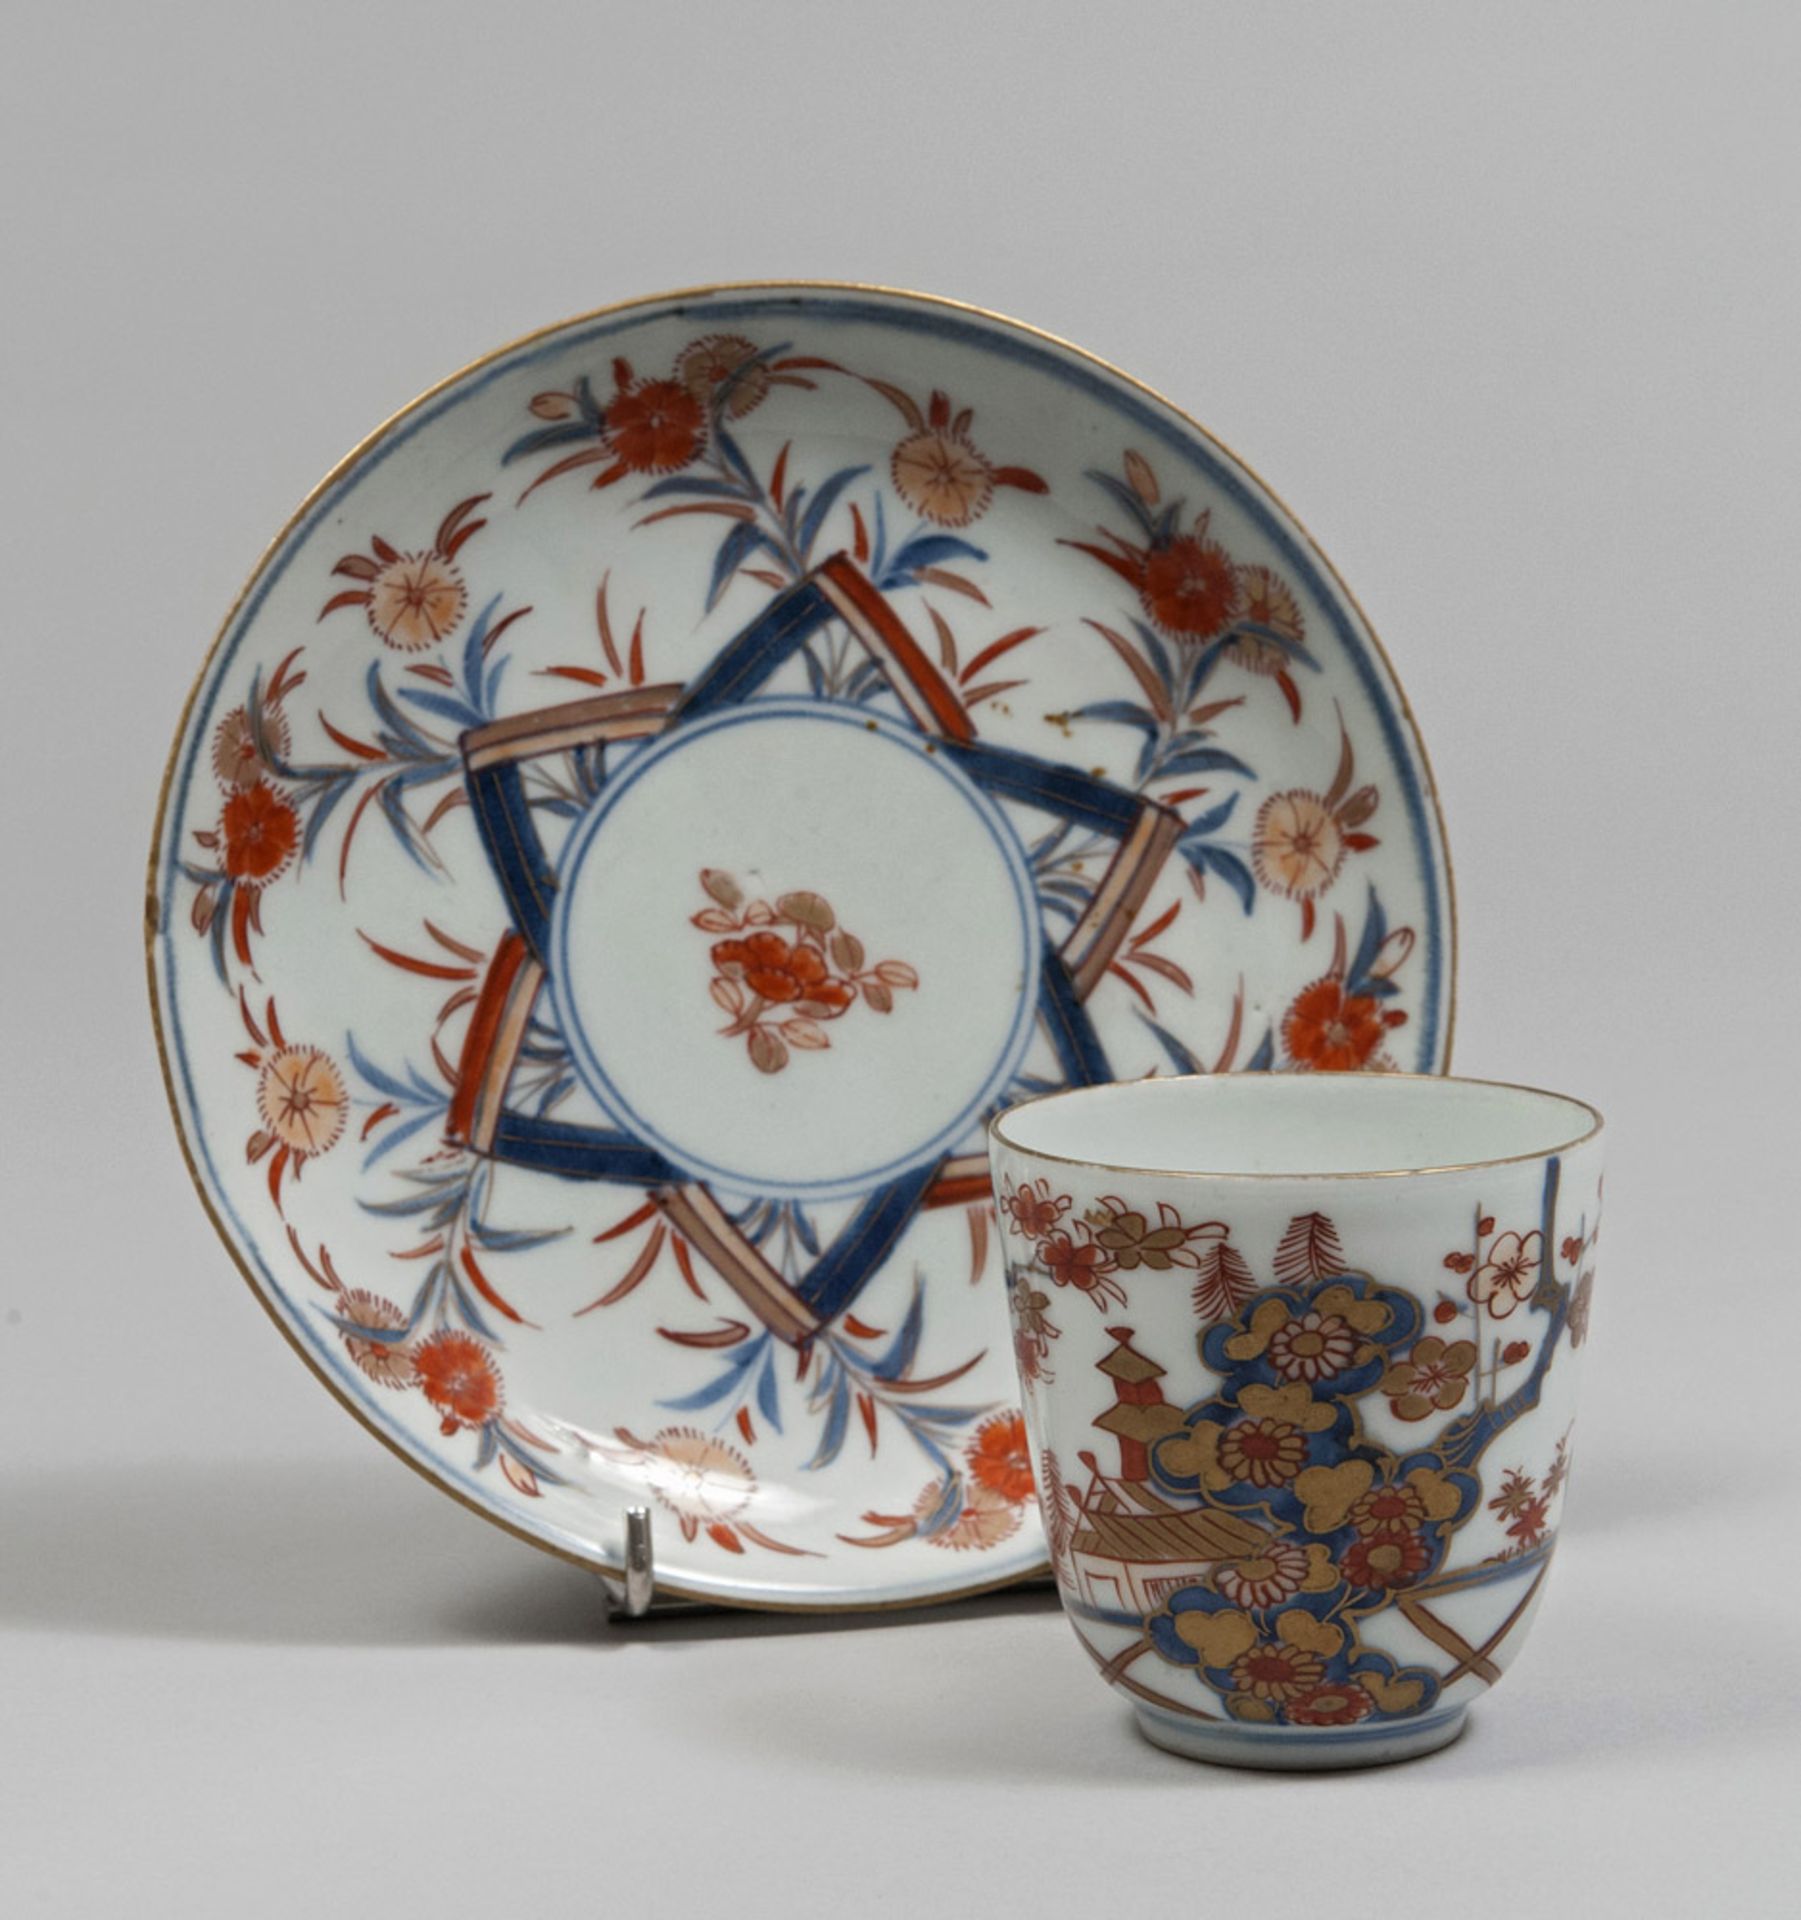 A JAPANESE POLYCHROME ENAMEL PORCELAIN CUP AND SAUCER, FIRST HALF 18TH CENTURY Measures cup cm. 7,